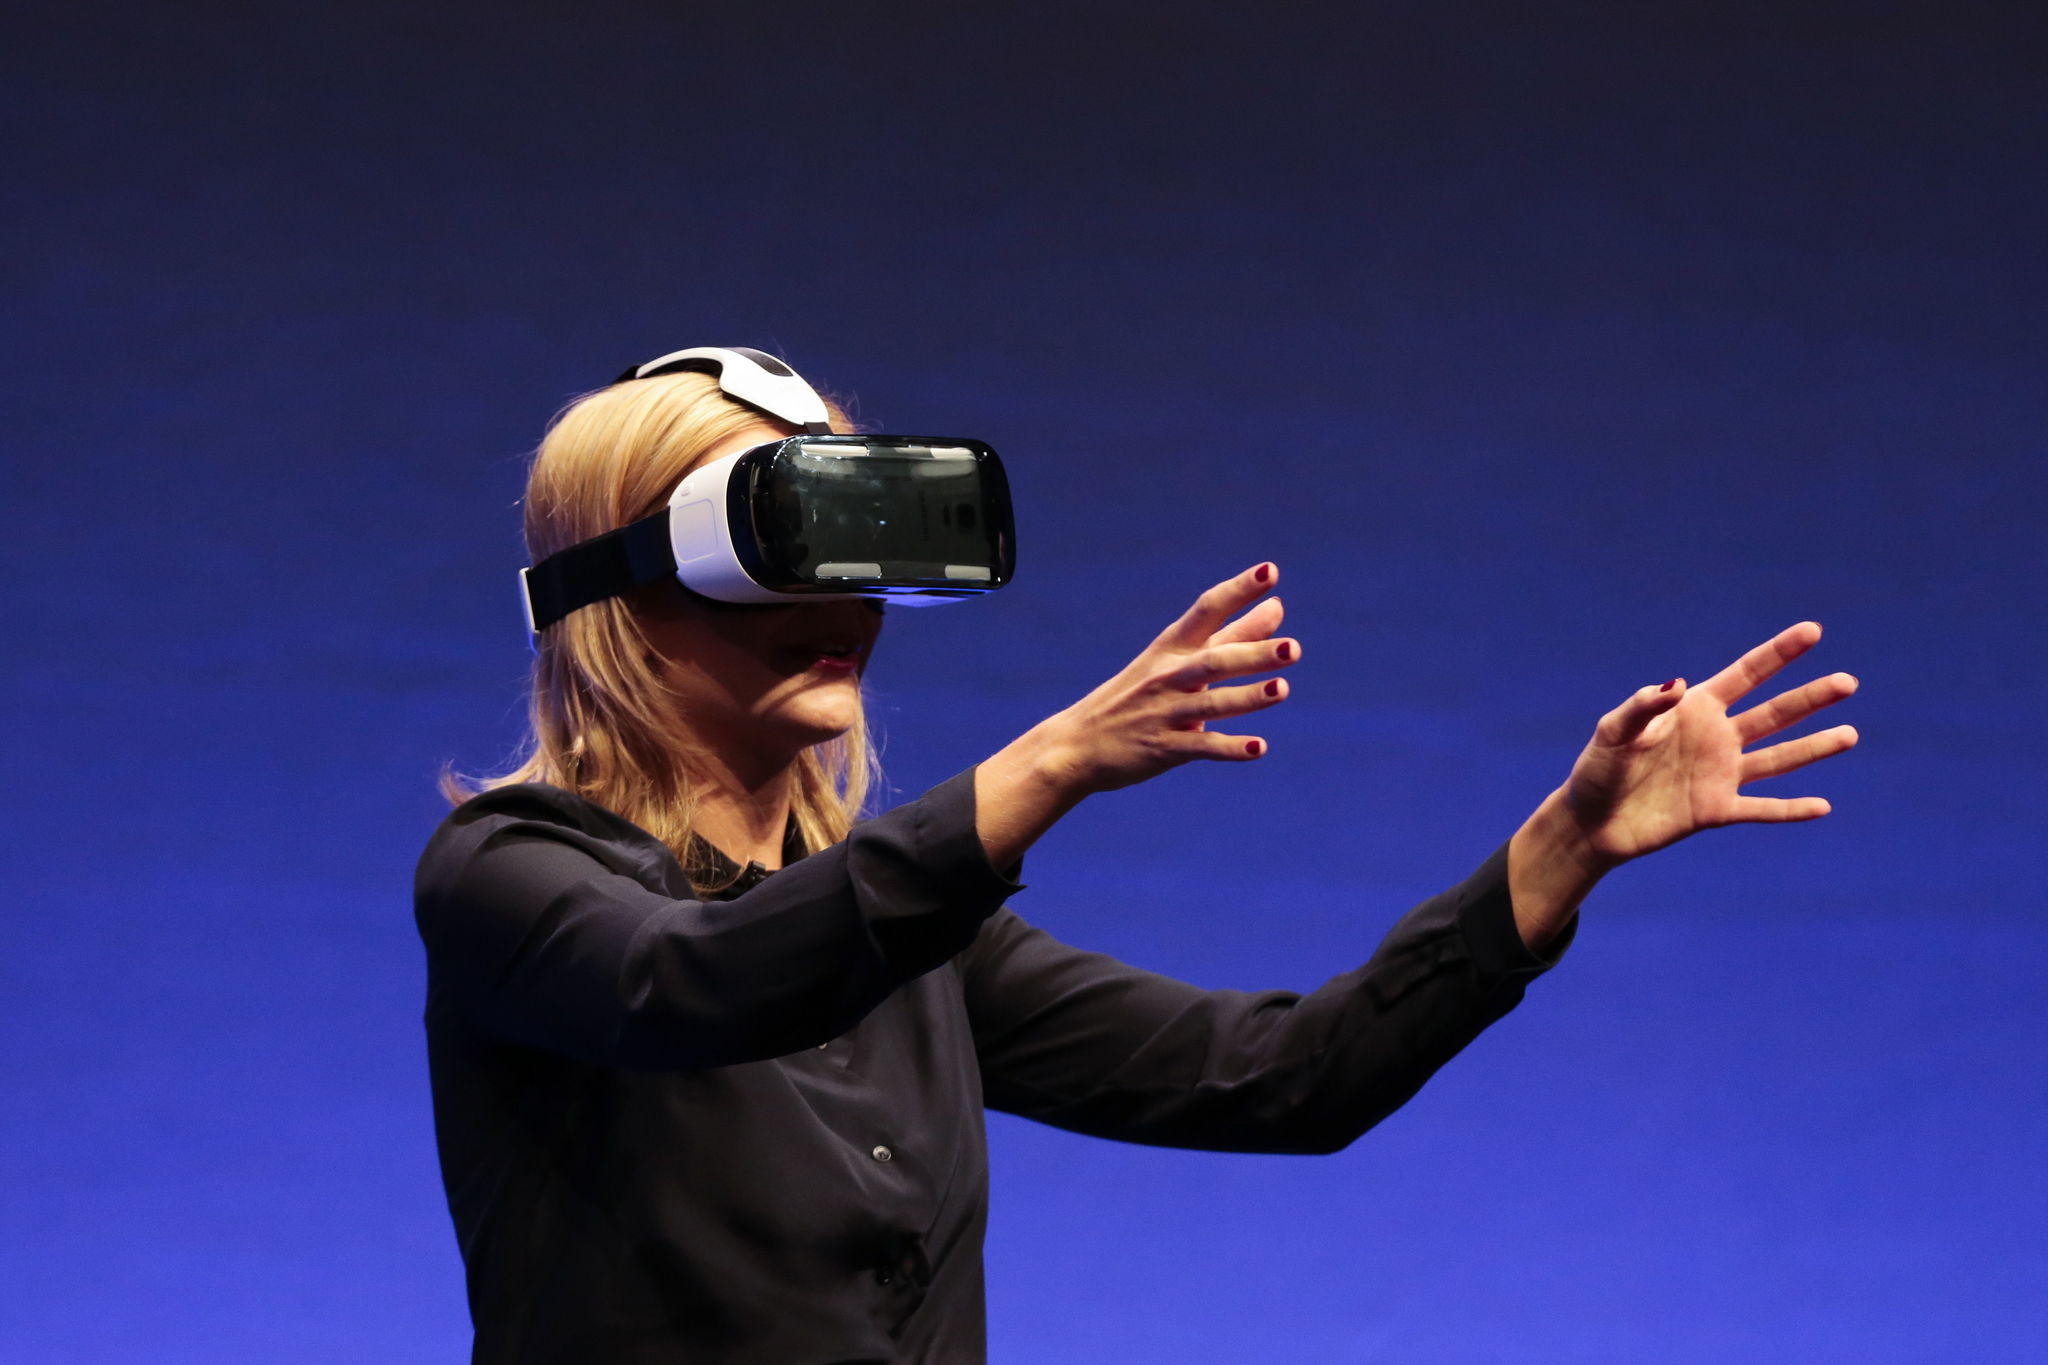 In this Sept. 3, 2014 file photo, British television presenter Rachel Riley shows a virtual-reality headset called Gear VR during an unpacked event of Samsung ahead of the consumer electronic fair IFA in Berlin. Oculus, the virtual reality company acquired by Facebook earlier this year for $2 billion, is holding its first-ever developers conference and is expected to discuss the much-anticipated release of its VR headset for consumers. The two-day Oculus Connect conference begins Friday, Sept. 19, 2014.